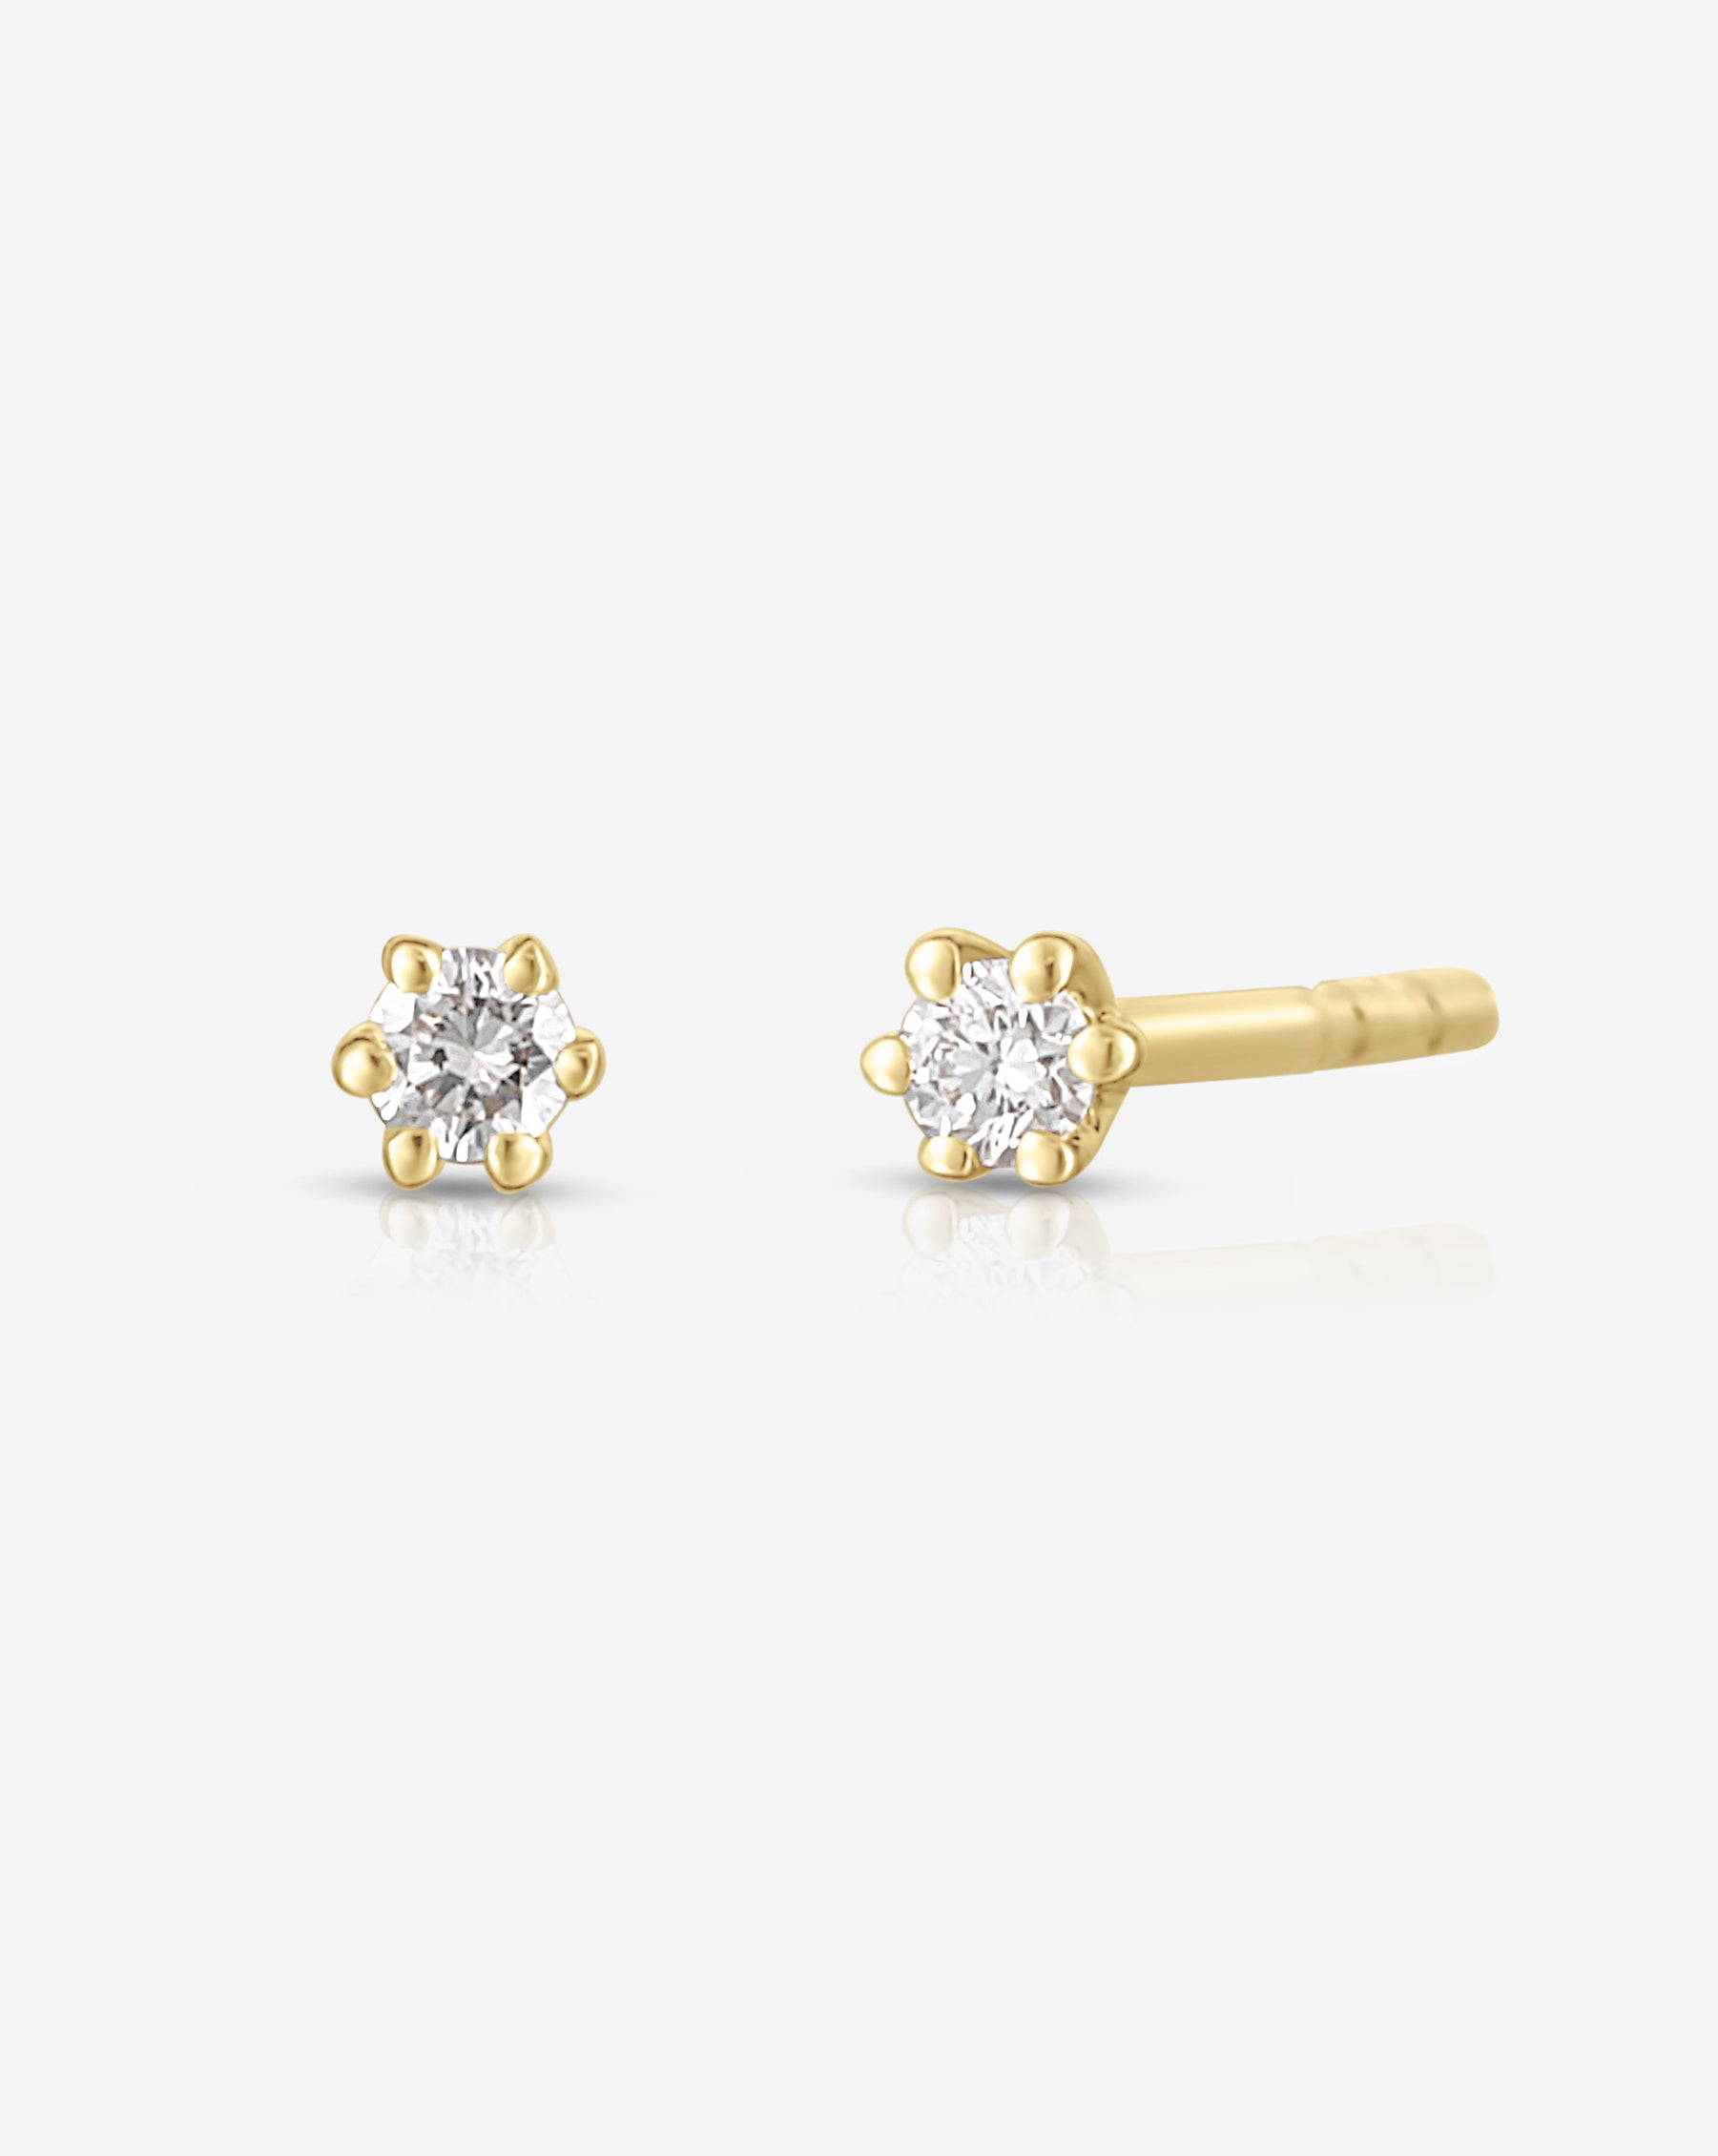 A Simple Guide to Buying a Men's Diamond Stud Earrings